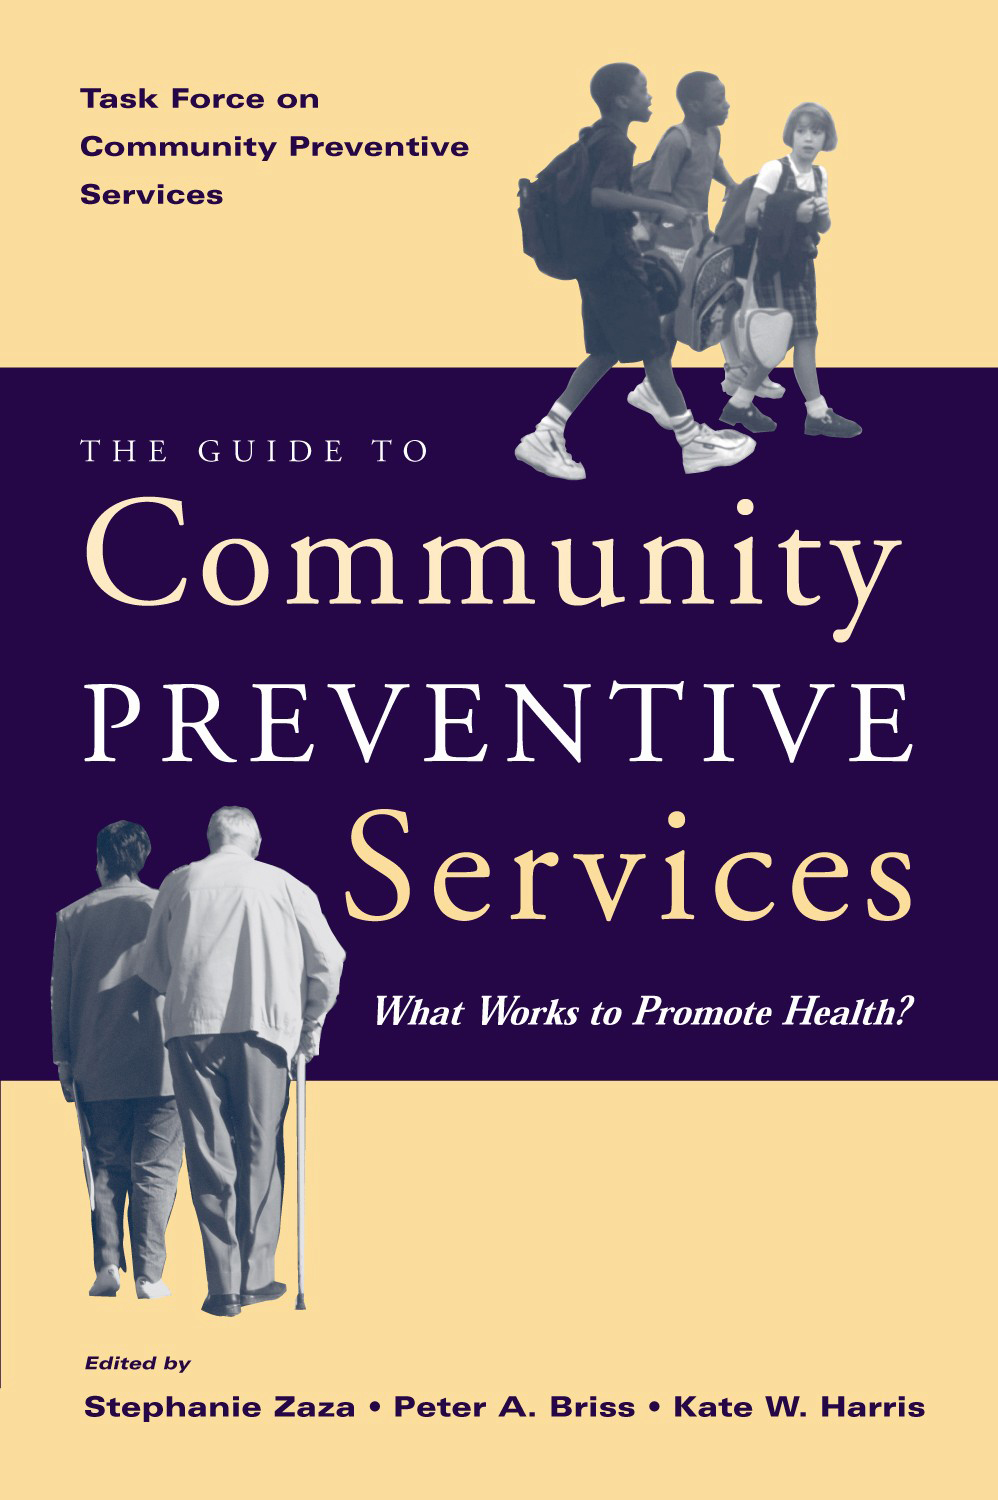 Image of the book cover for 'PREVENTIVE SERVICES '